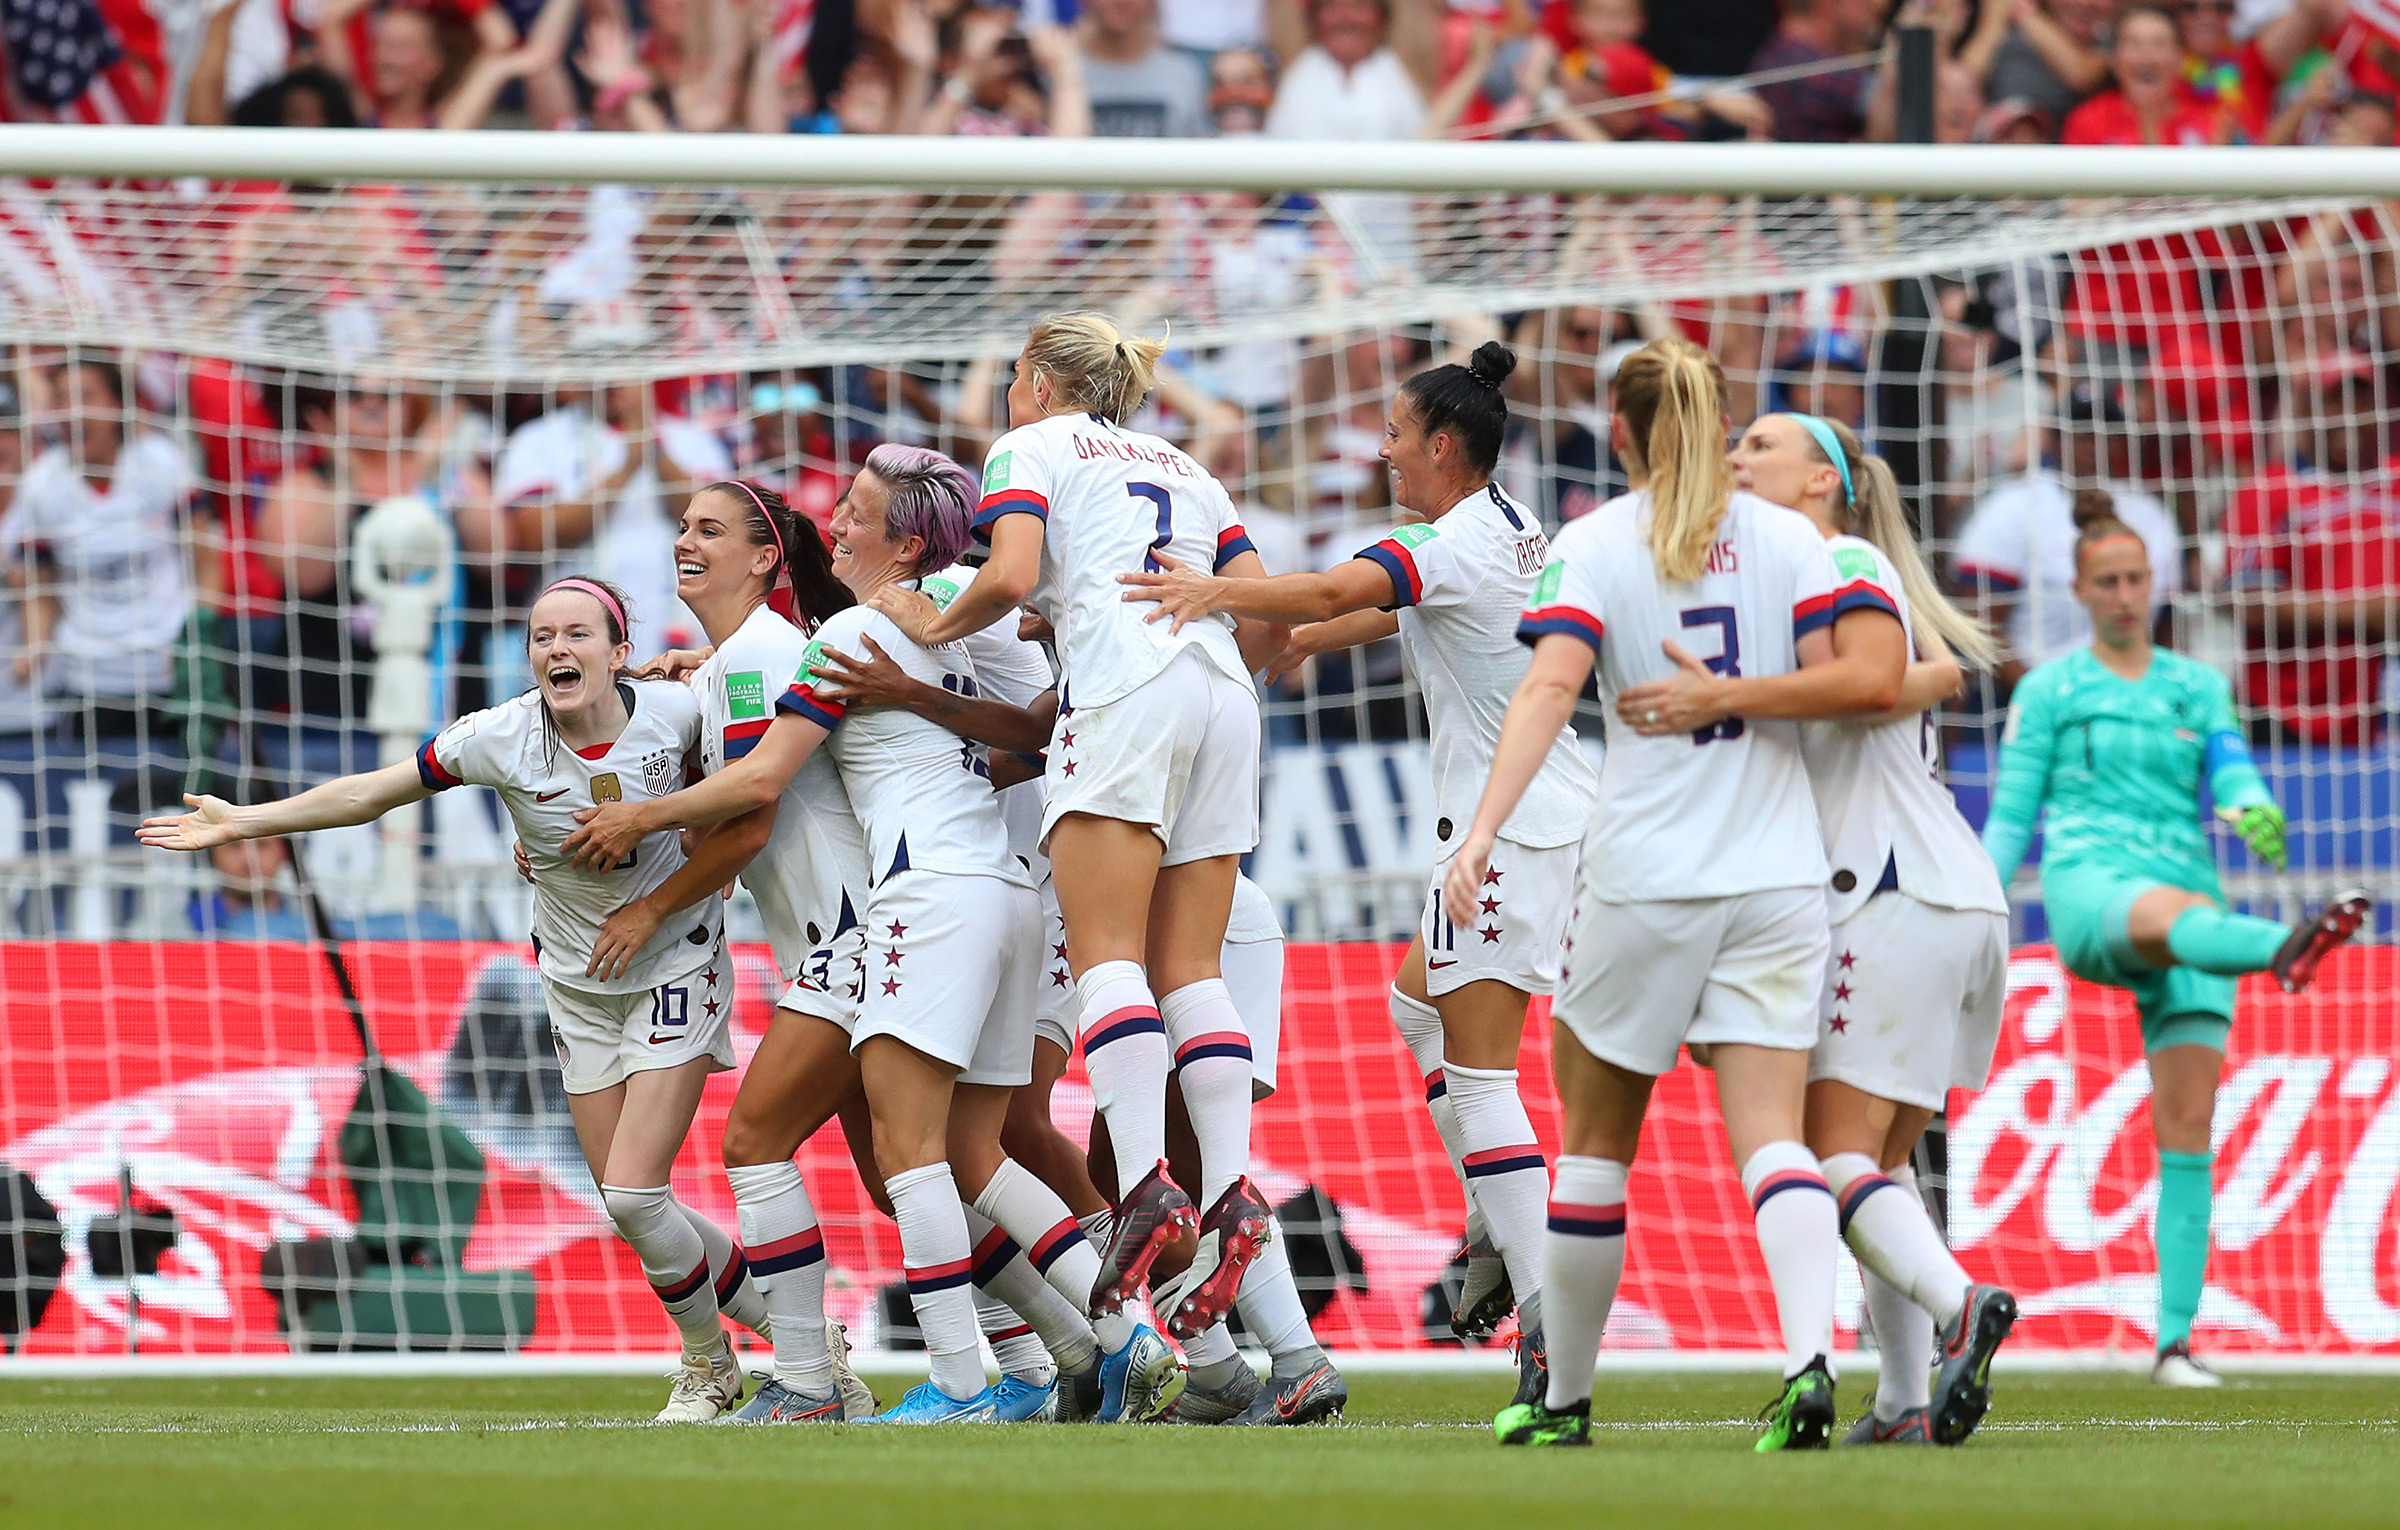 Rose Lavelle celebrates with teammates after scoring her team's second goal during the Women's World Cup Final in Lyon, France on July 07